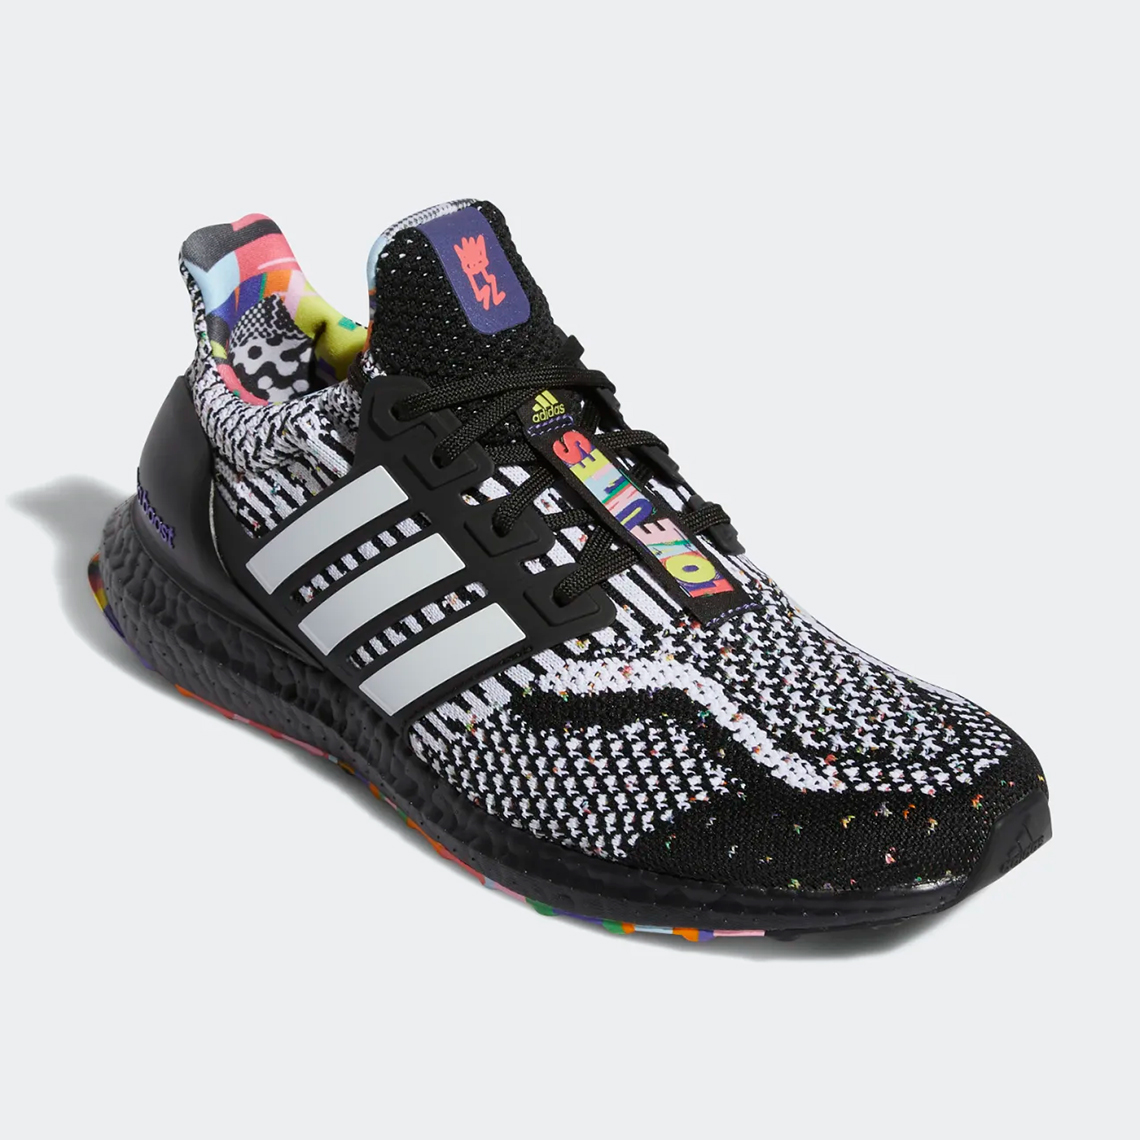 adidas ultraboost 5 dna pride month kris andrew gy4424 7